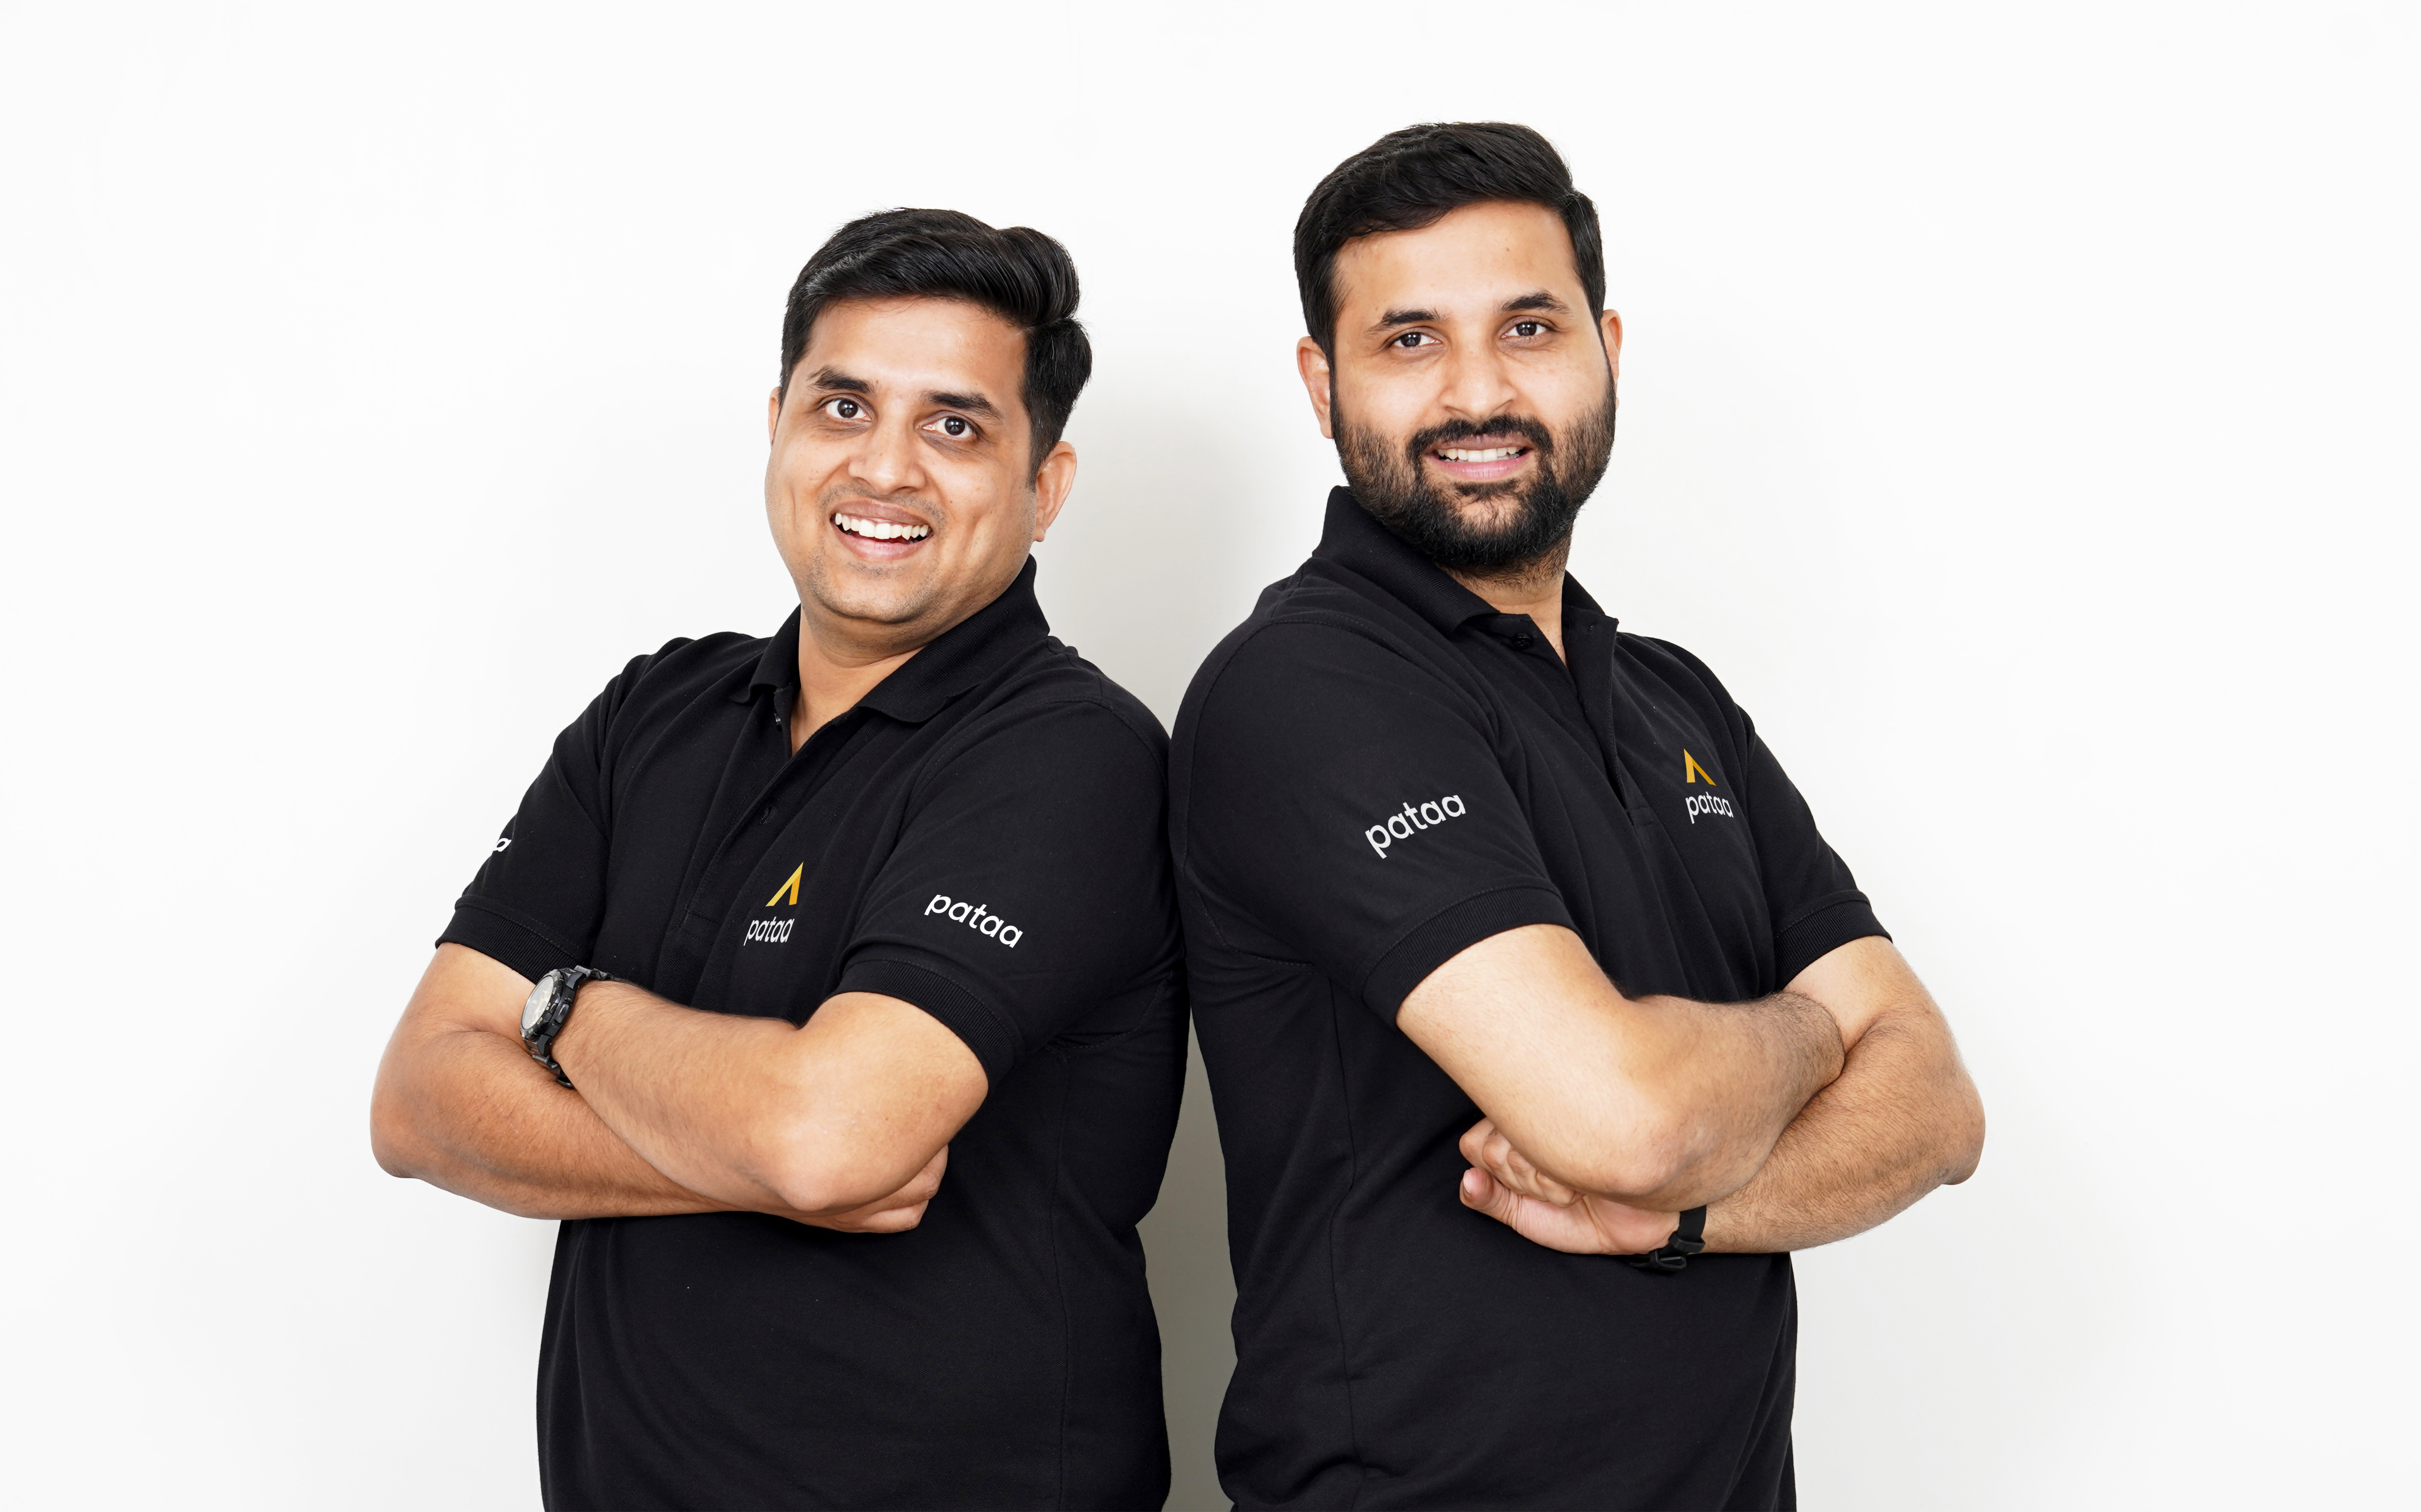 Pataa: Simplifying addresses, improving deliveries